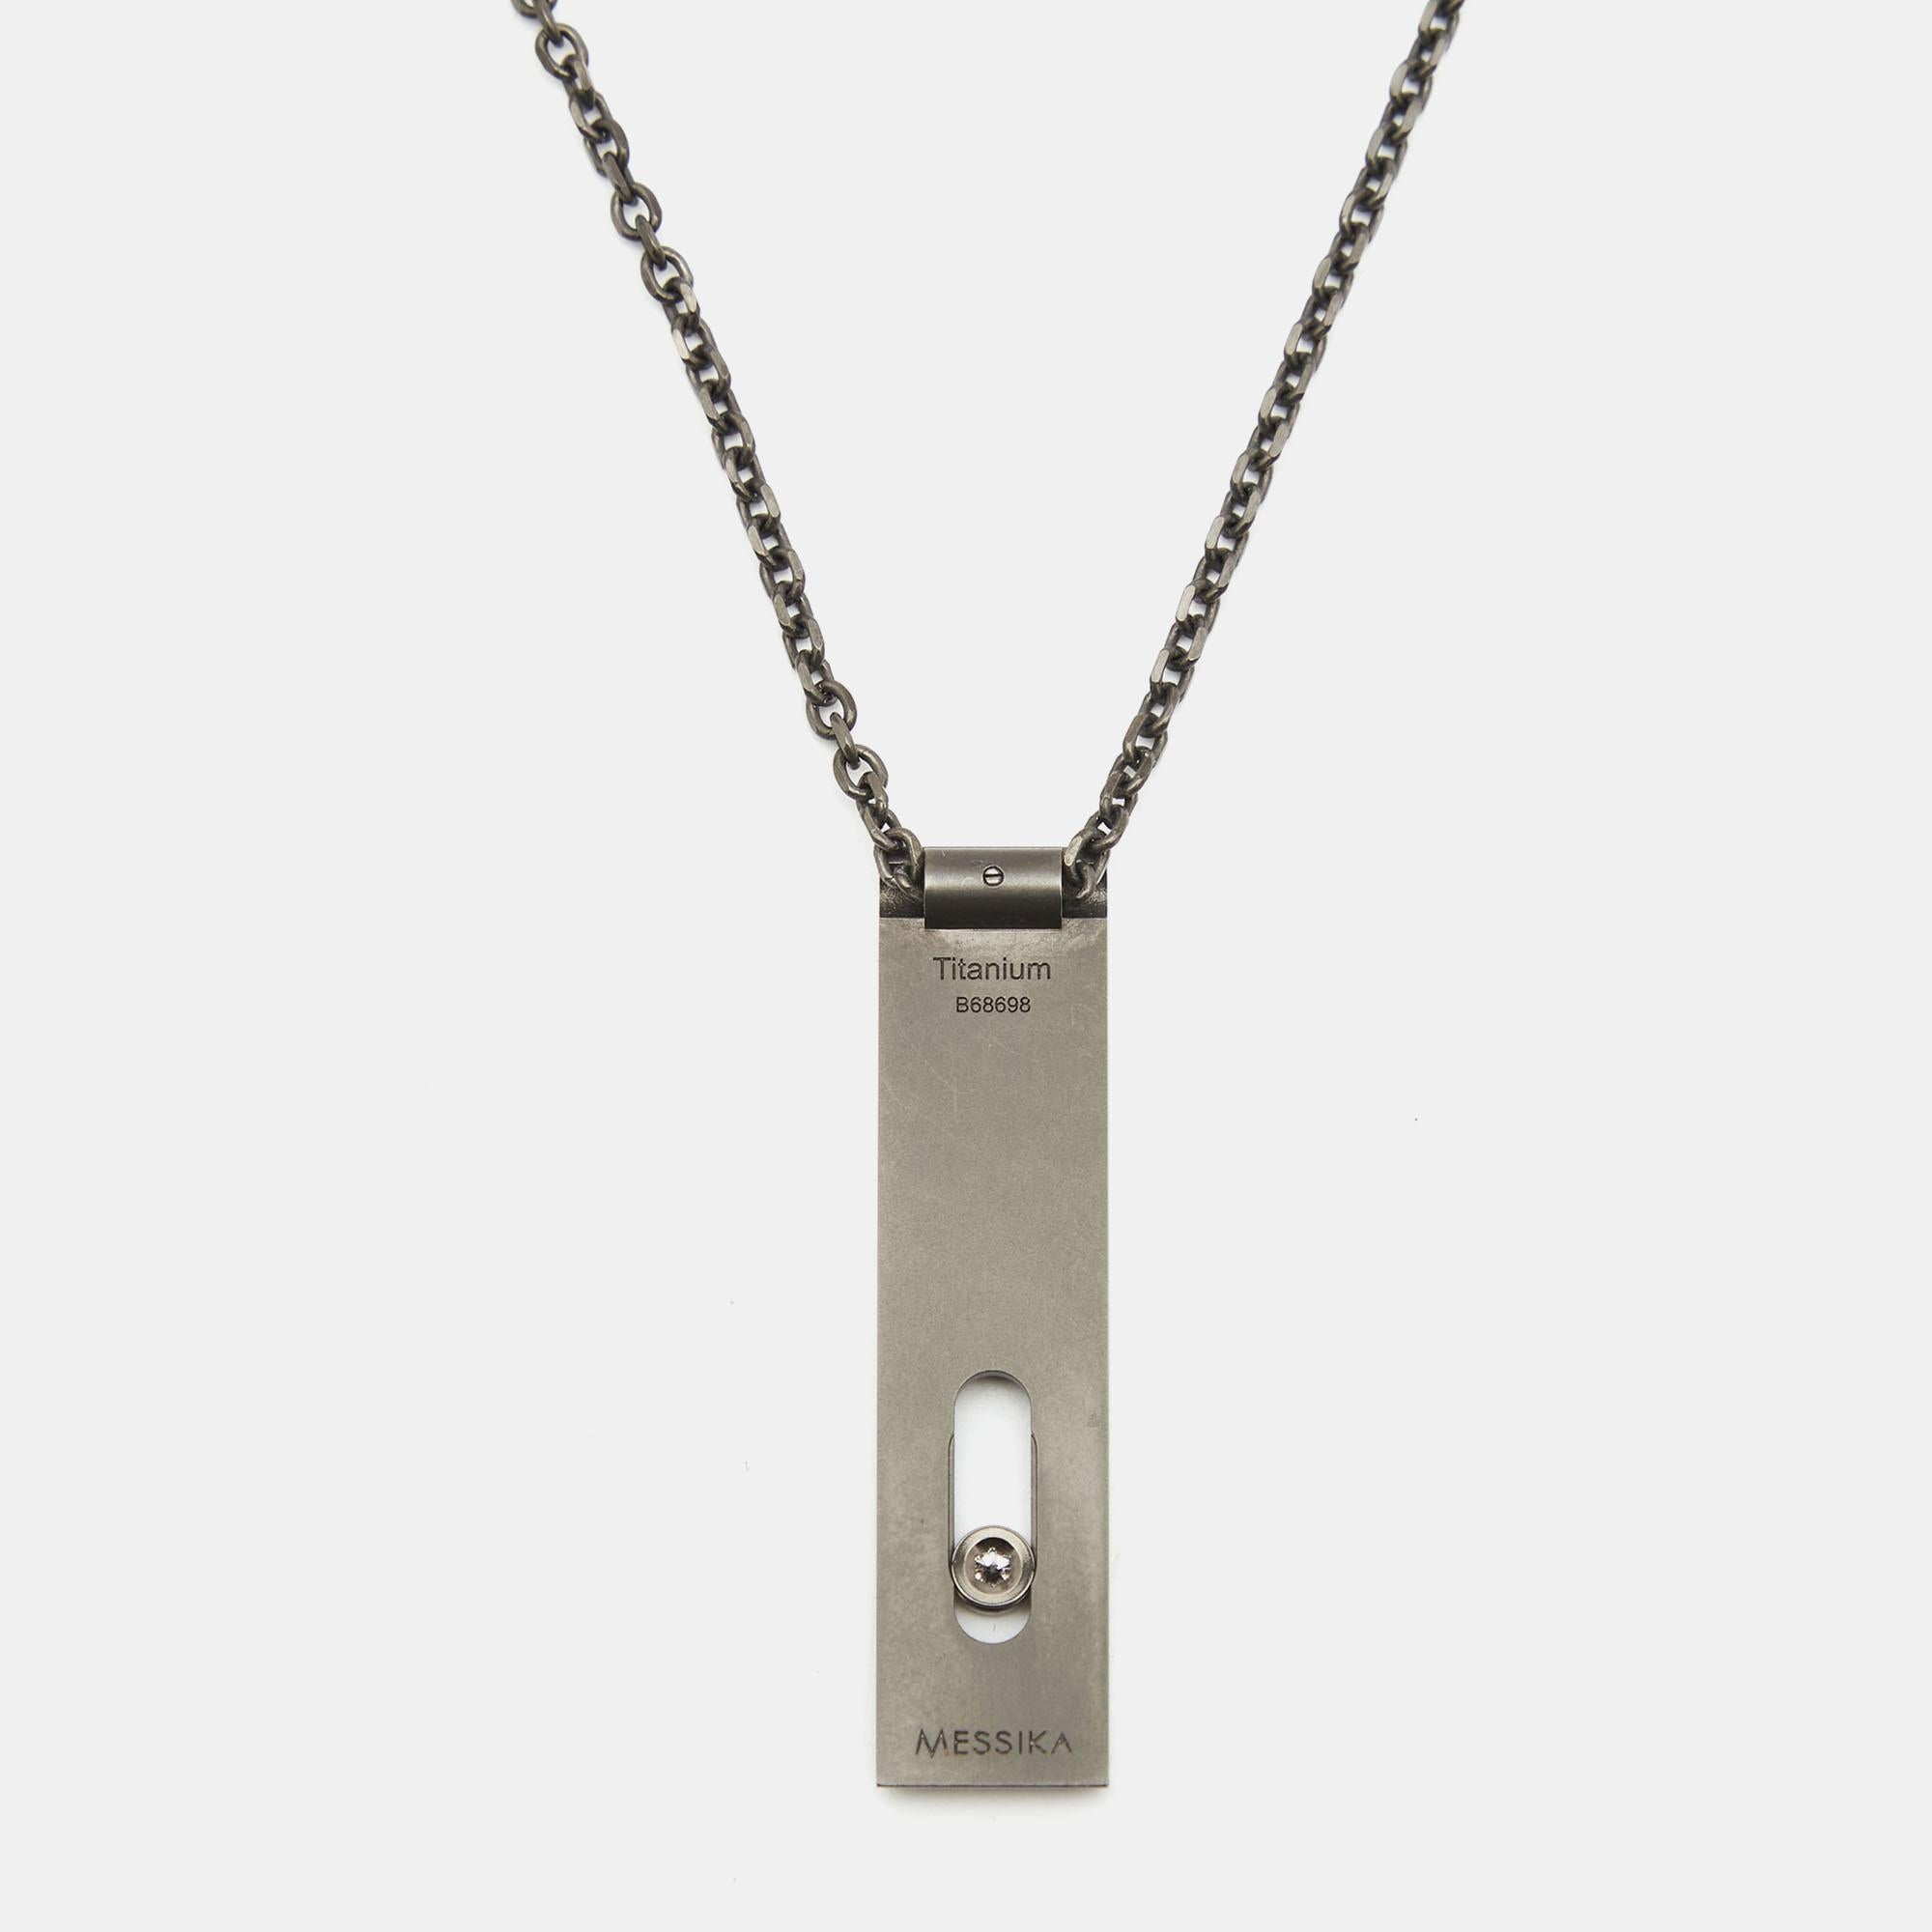 Popular with celebrities, Messika is one of Paris’ most sought-after fine jewelry makers. This titanium necklace is from the Move collection. The design involves a bar-shaped pendant carrying a single diamond and a slender chainlink secured by a